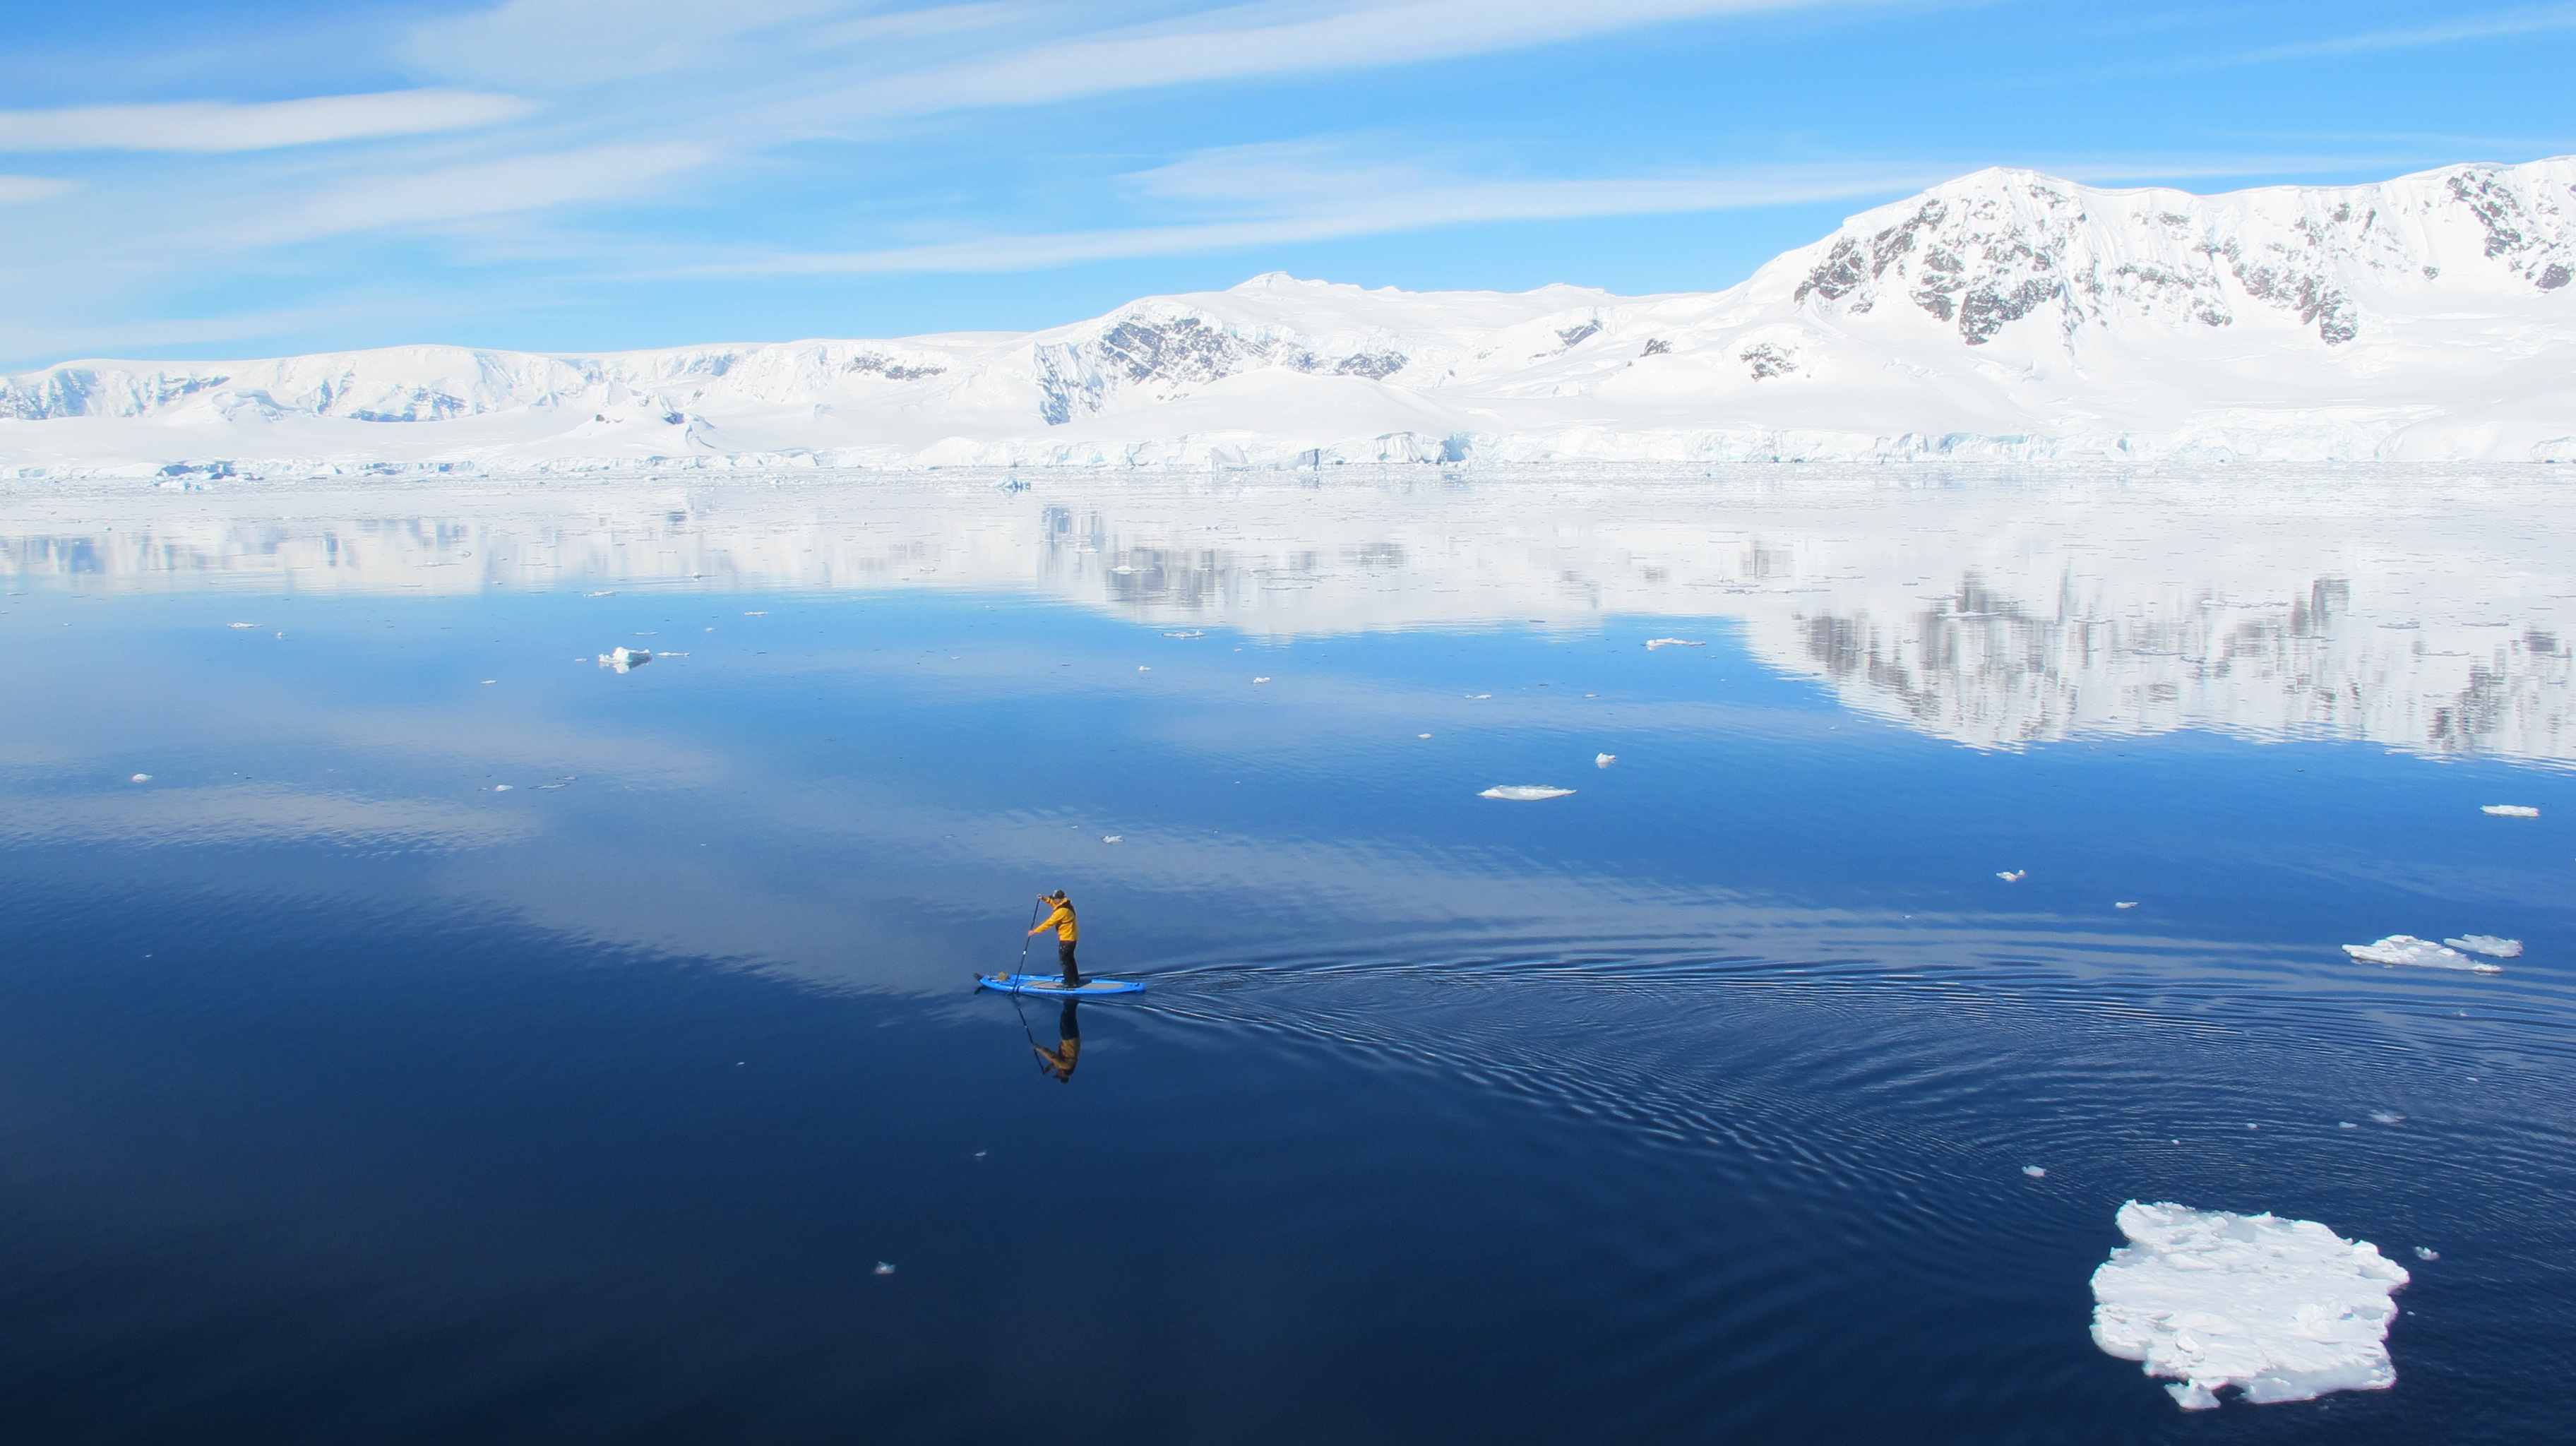 A passenger glides over the surface of pristine, glass-still Antarctic waters on a standup paddleboard.